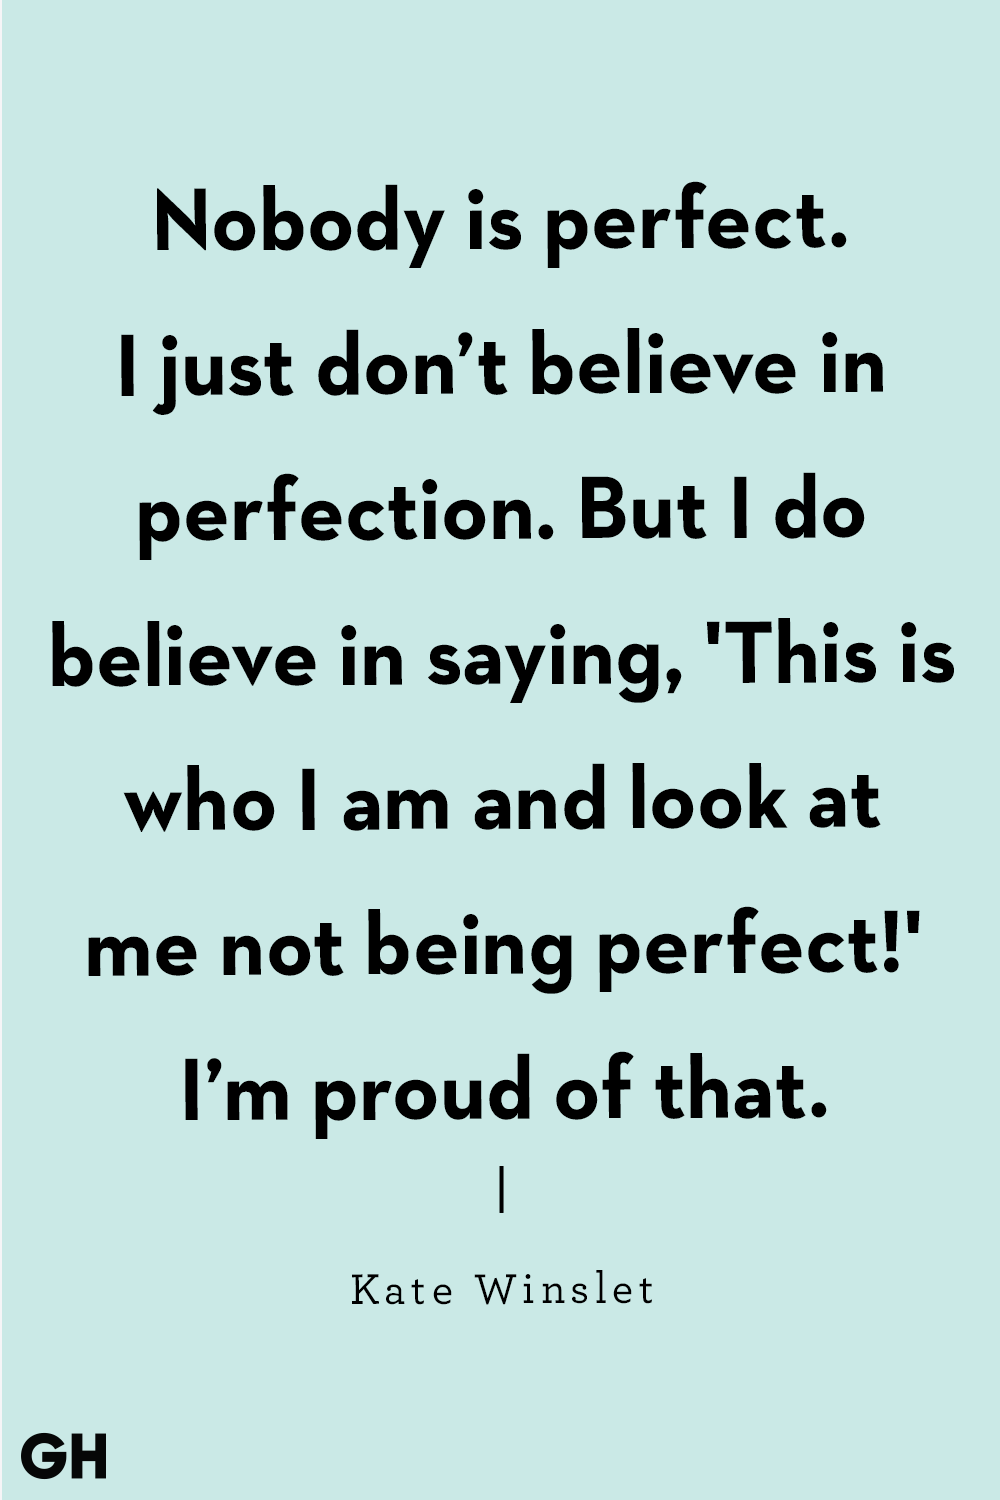 30 Body Positivity Quotes - Empowering Body Image Sayings